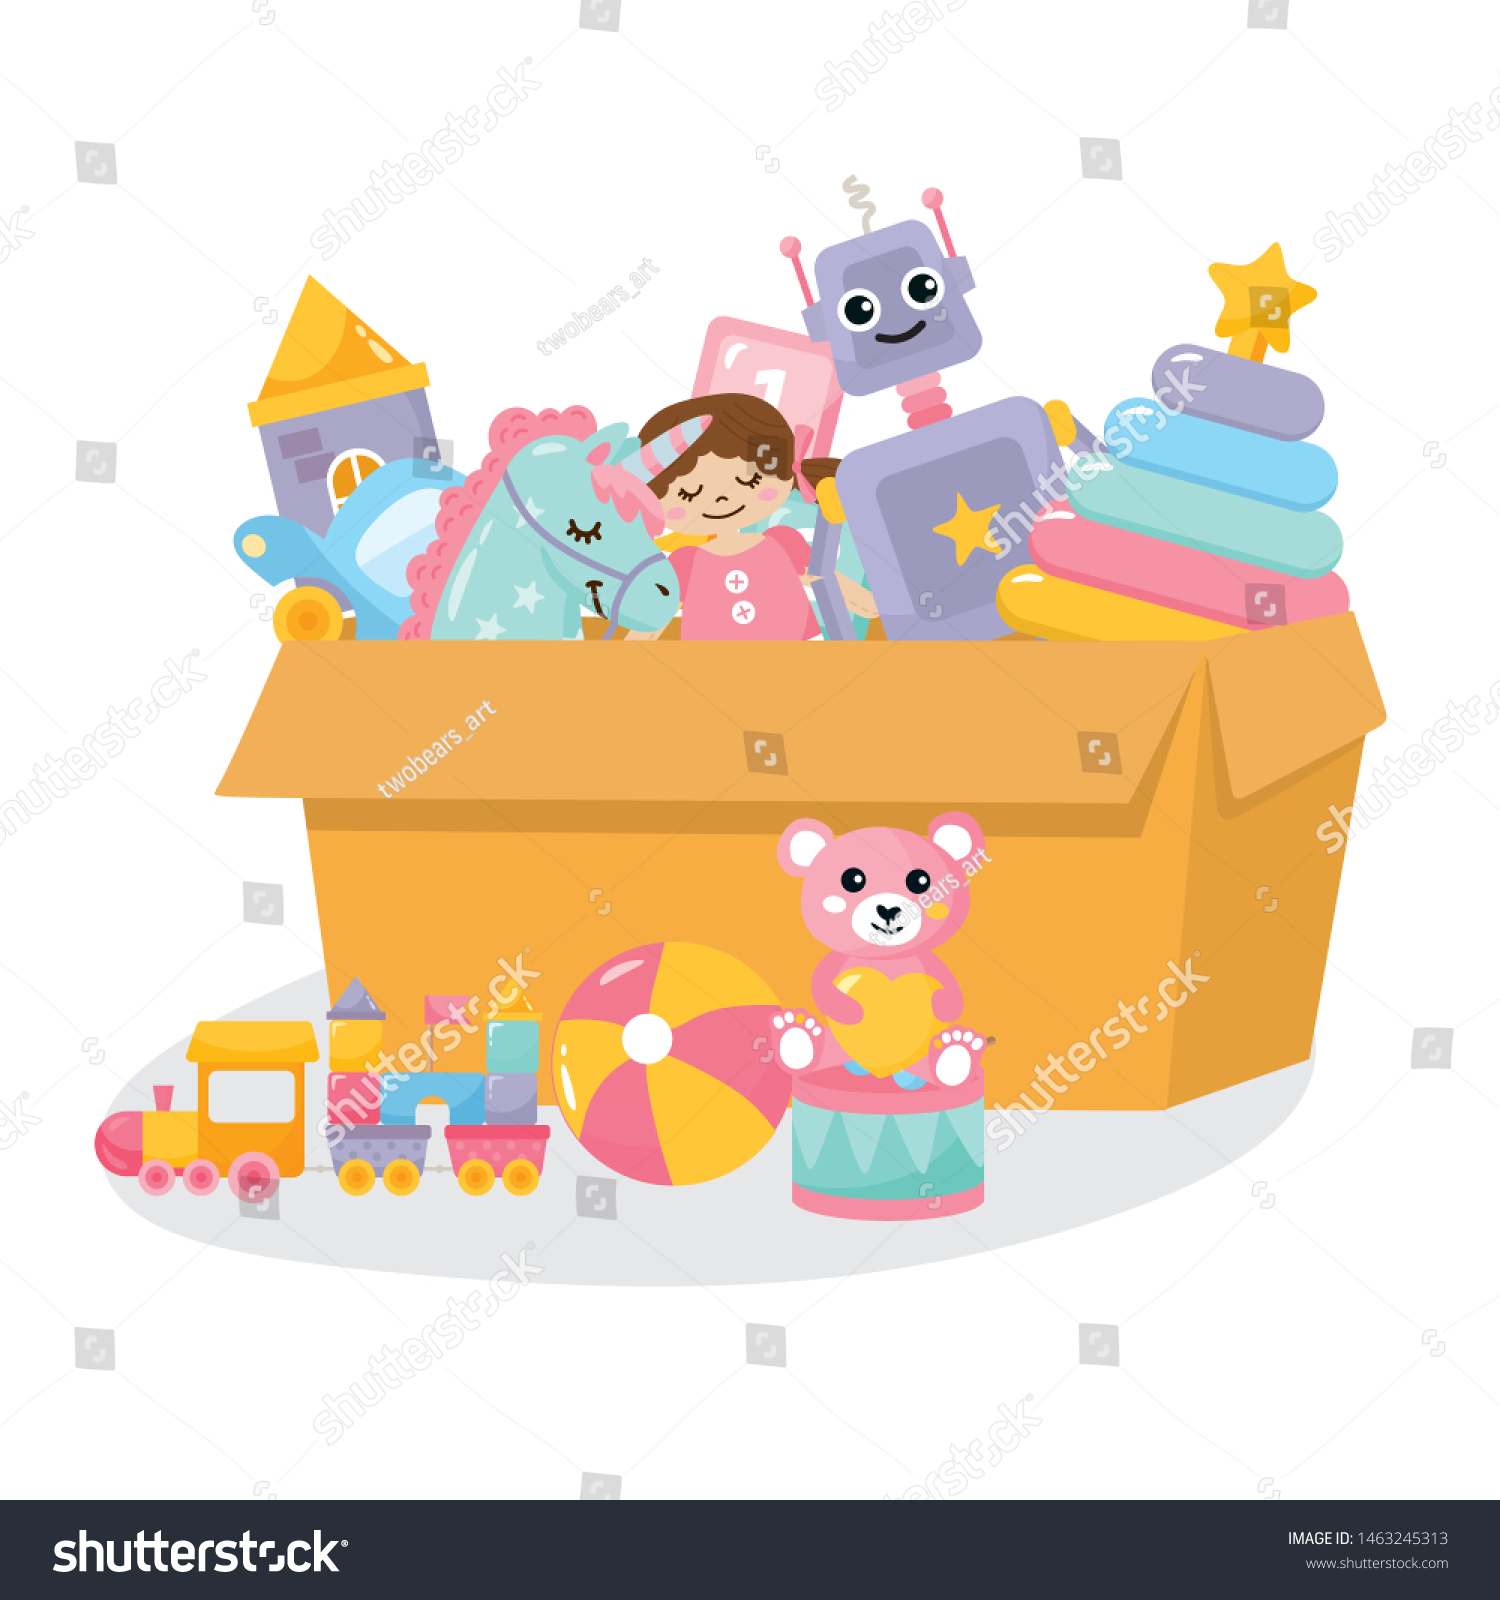 big box for toys